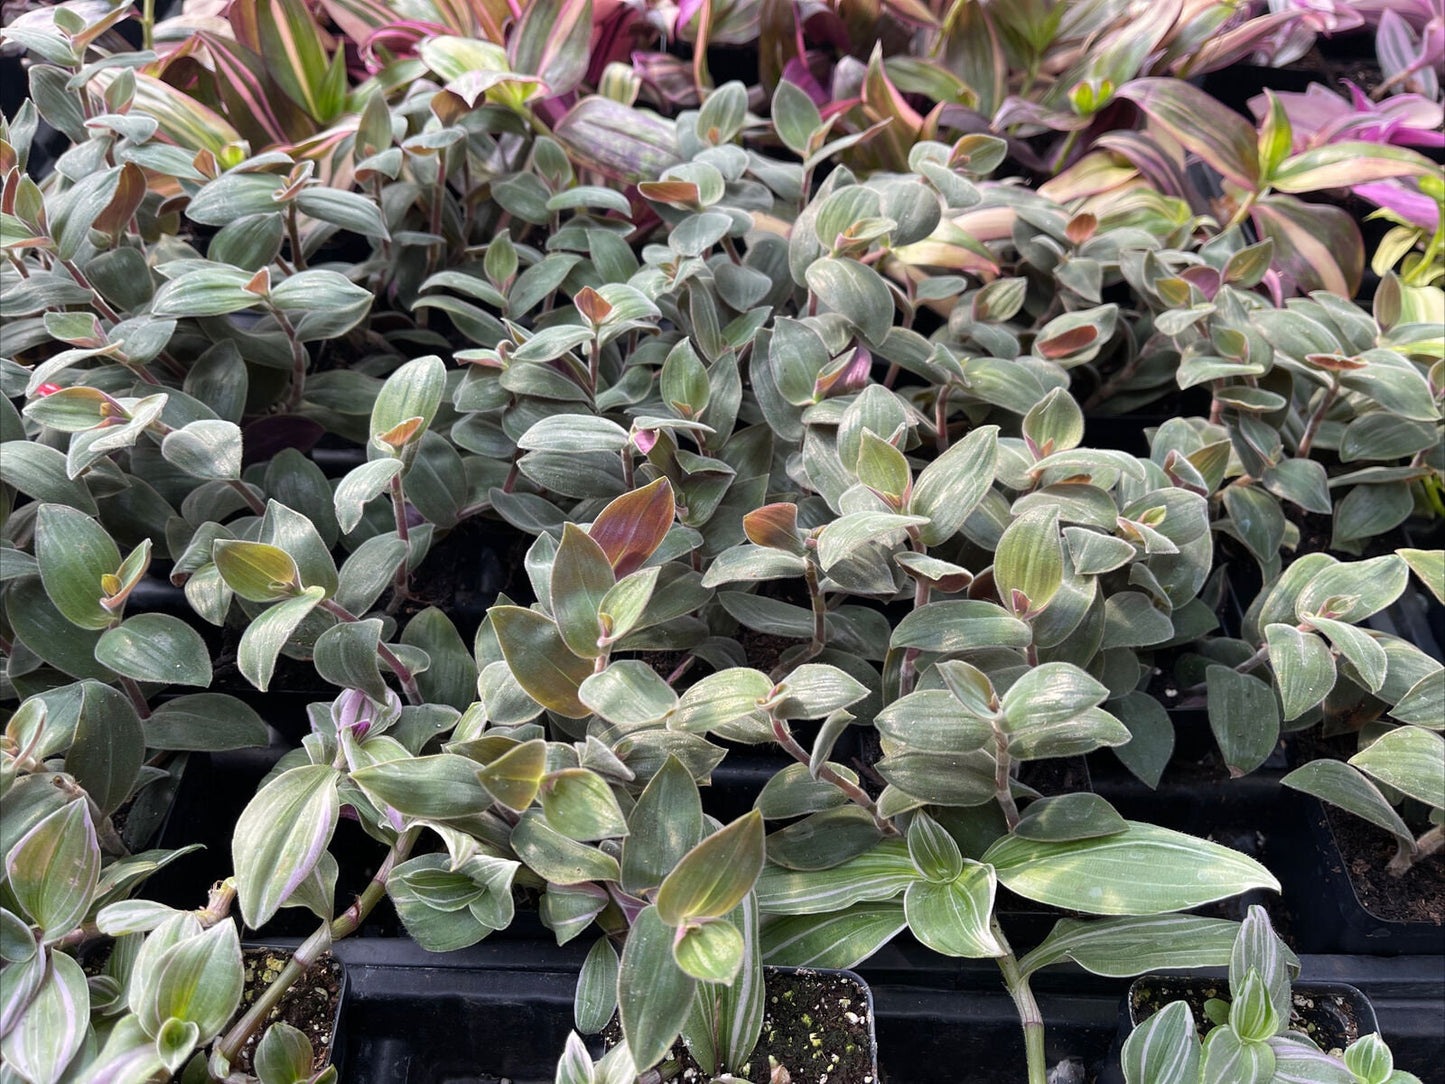 Tradescantia chrysophylla! “BABY BUNNY BELLIES” - 3 Large cuttings